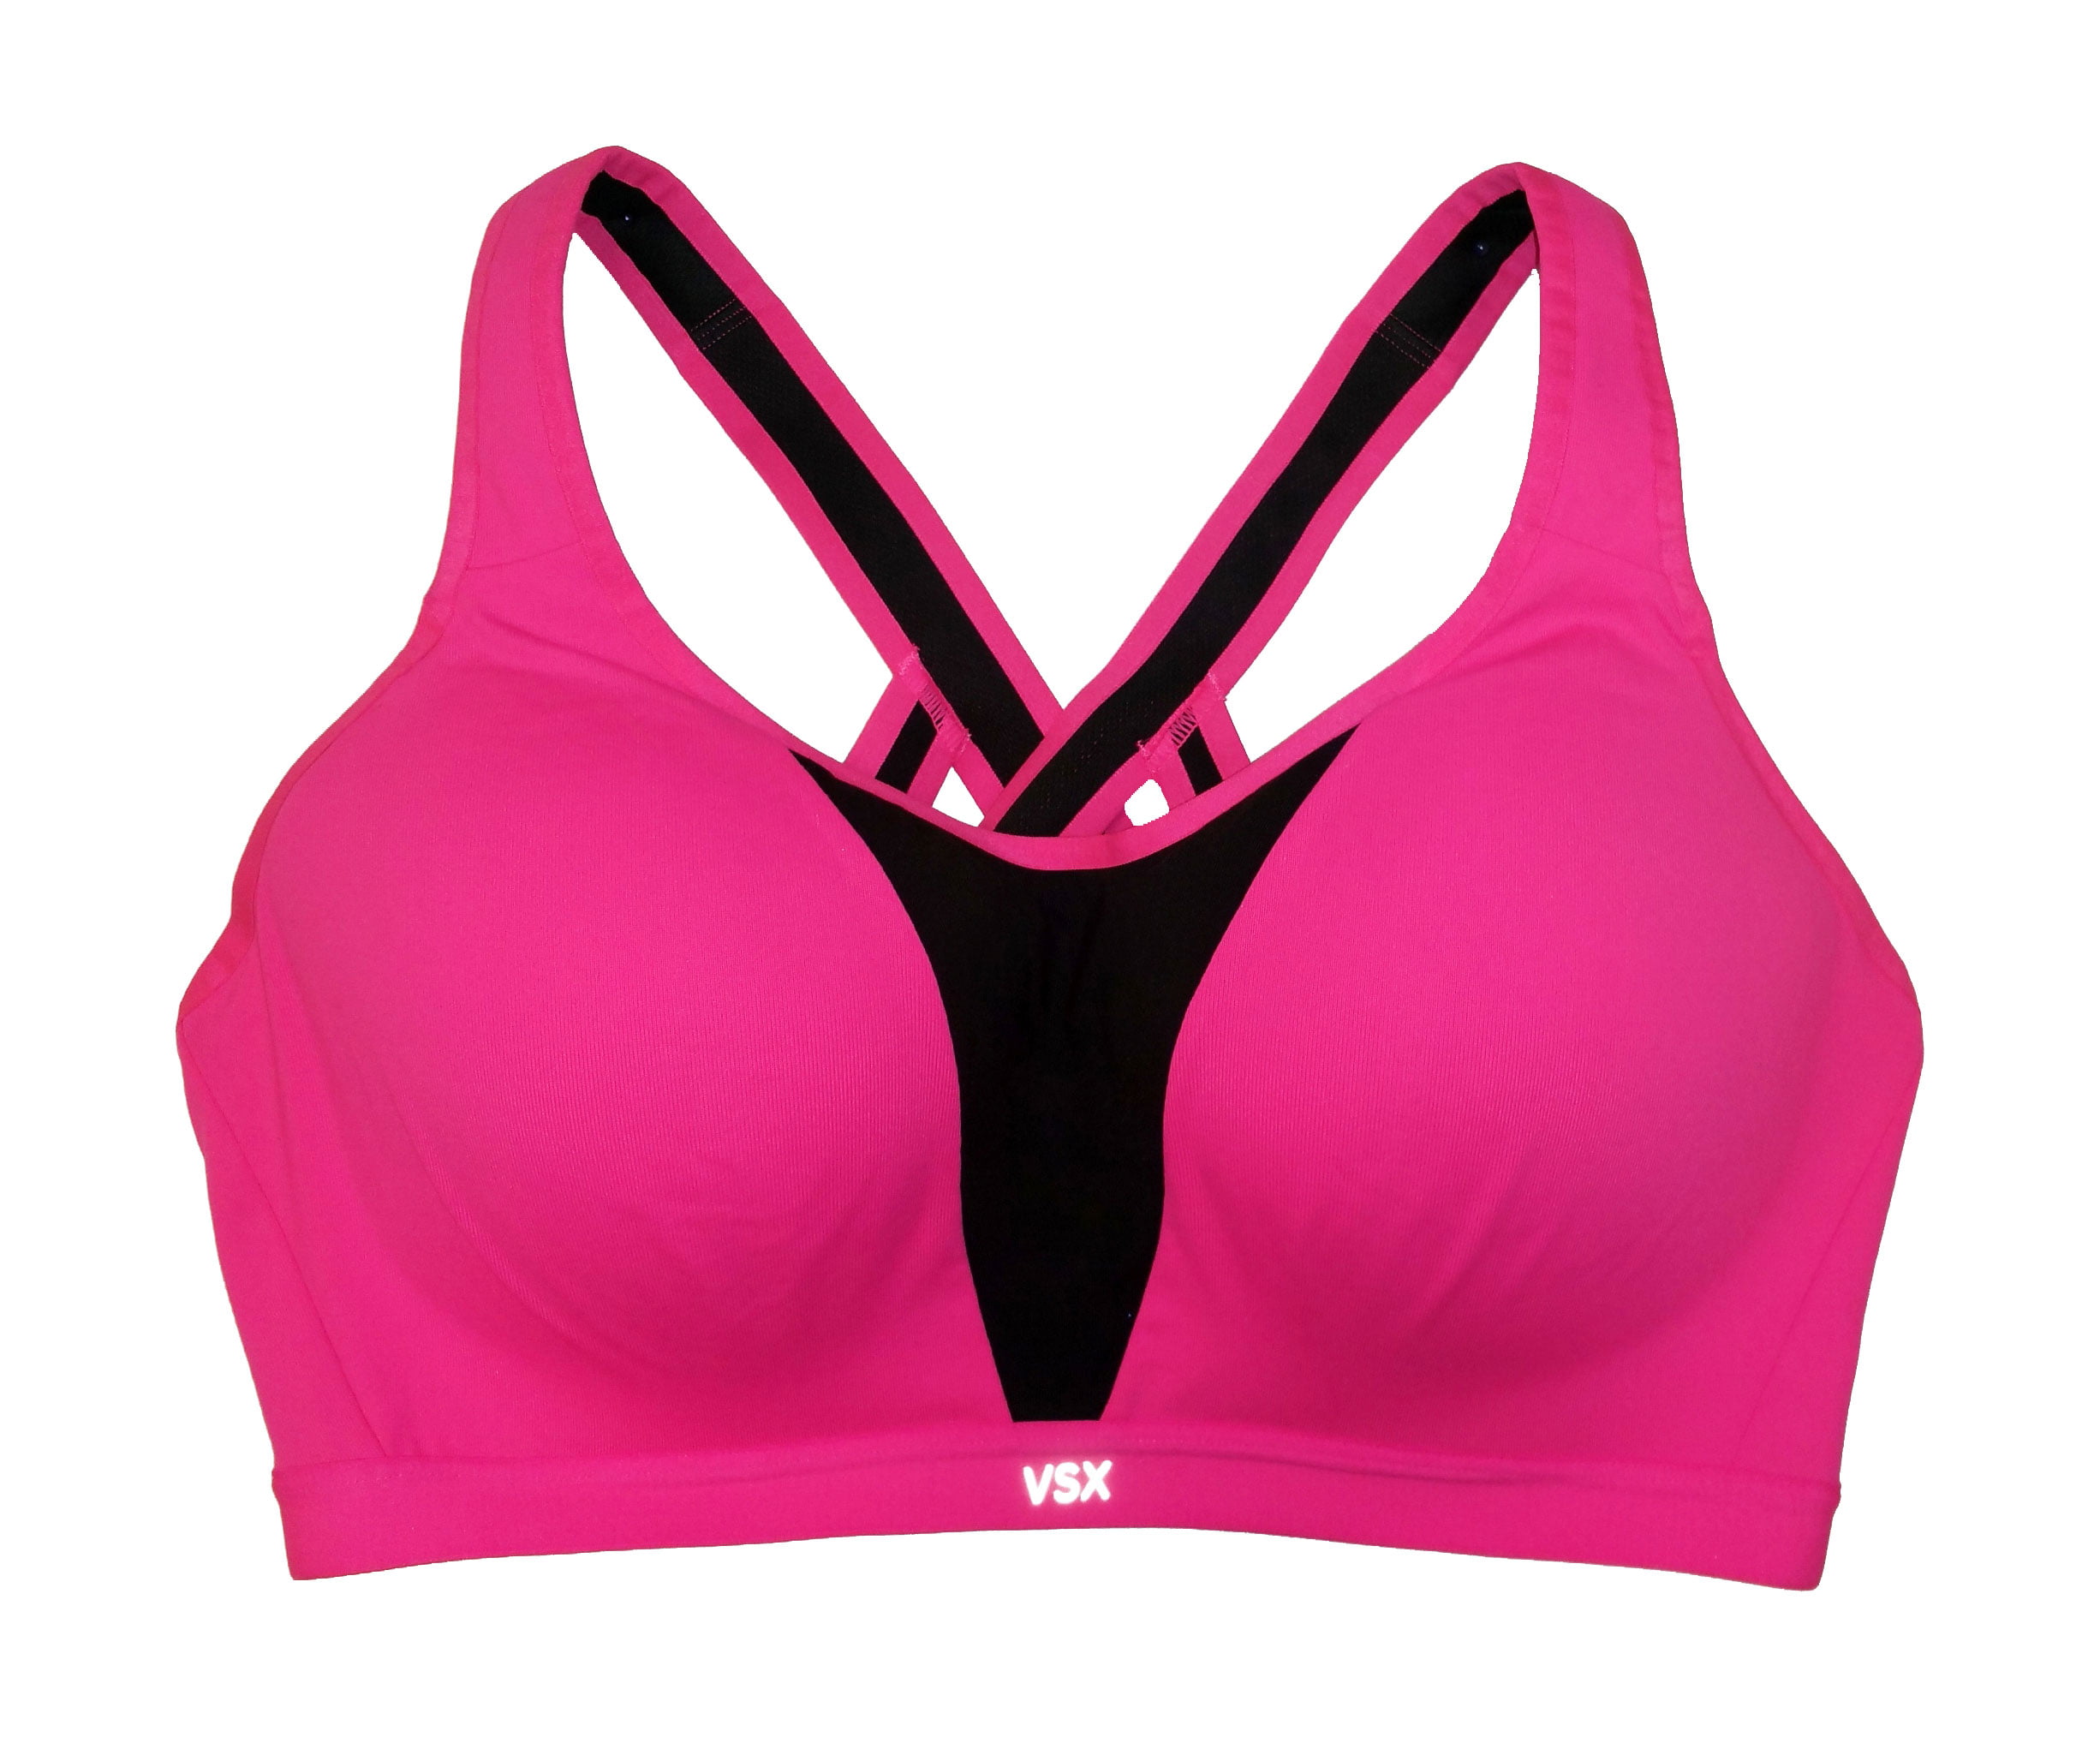 Victoria's Secret Sport Incredible Lightweight Coral Pink Wireless Bra, 34C  Size undefined - $17 - From Jessica